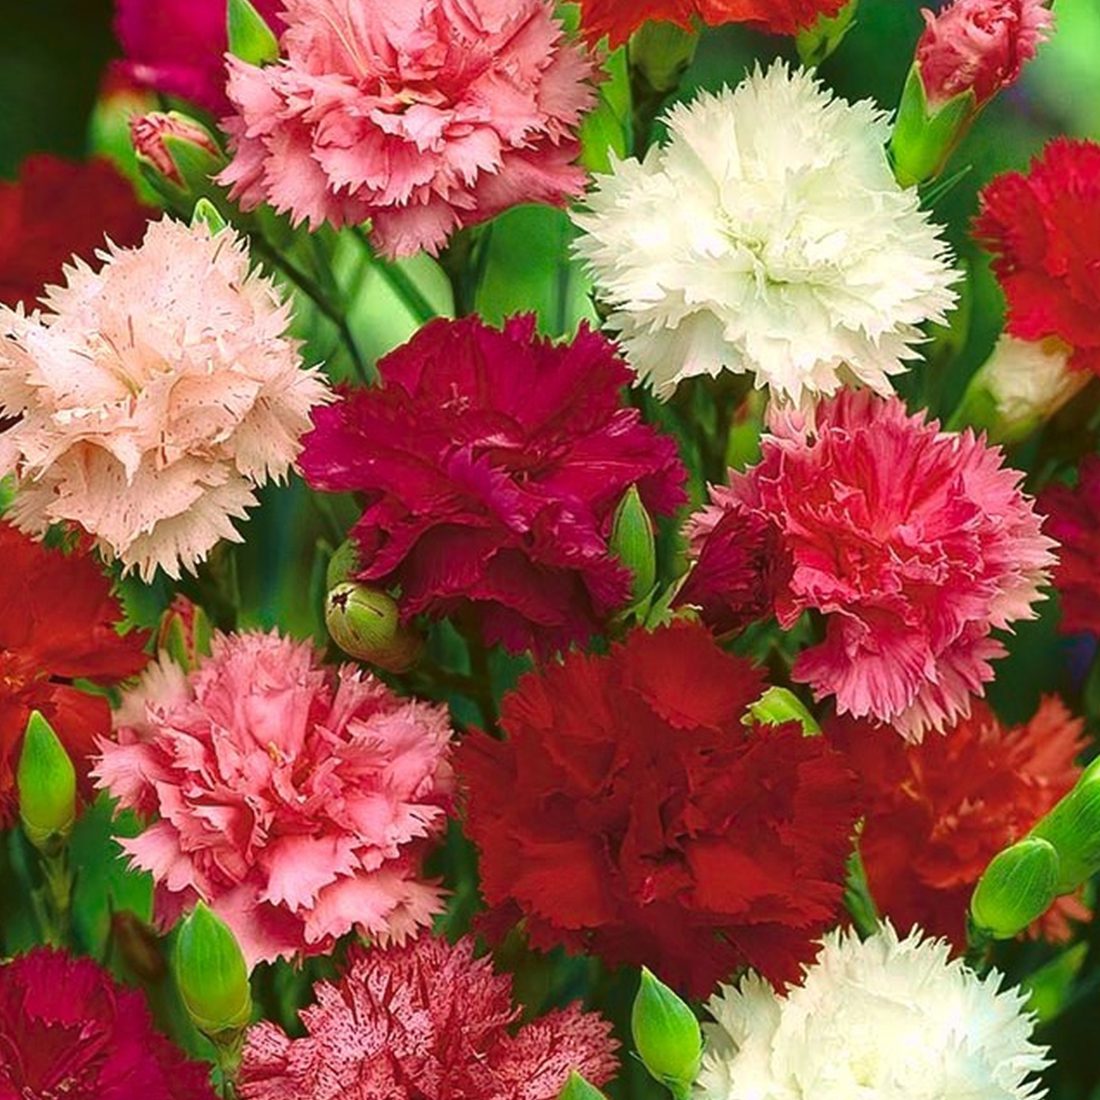 50 Mixed Chabaud Carnation Seeds - Welldales